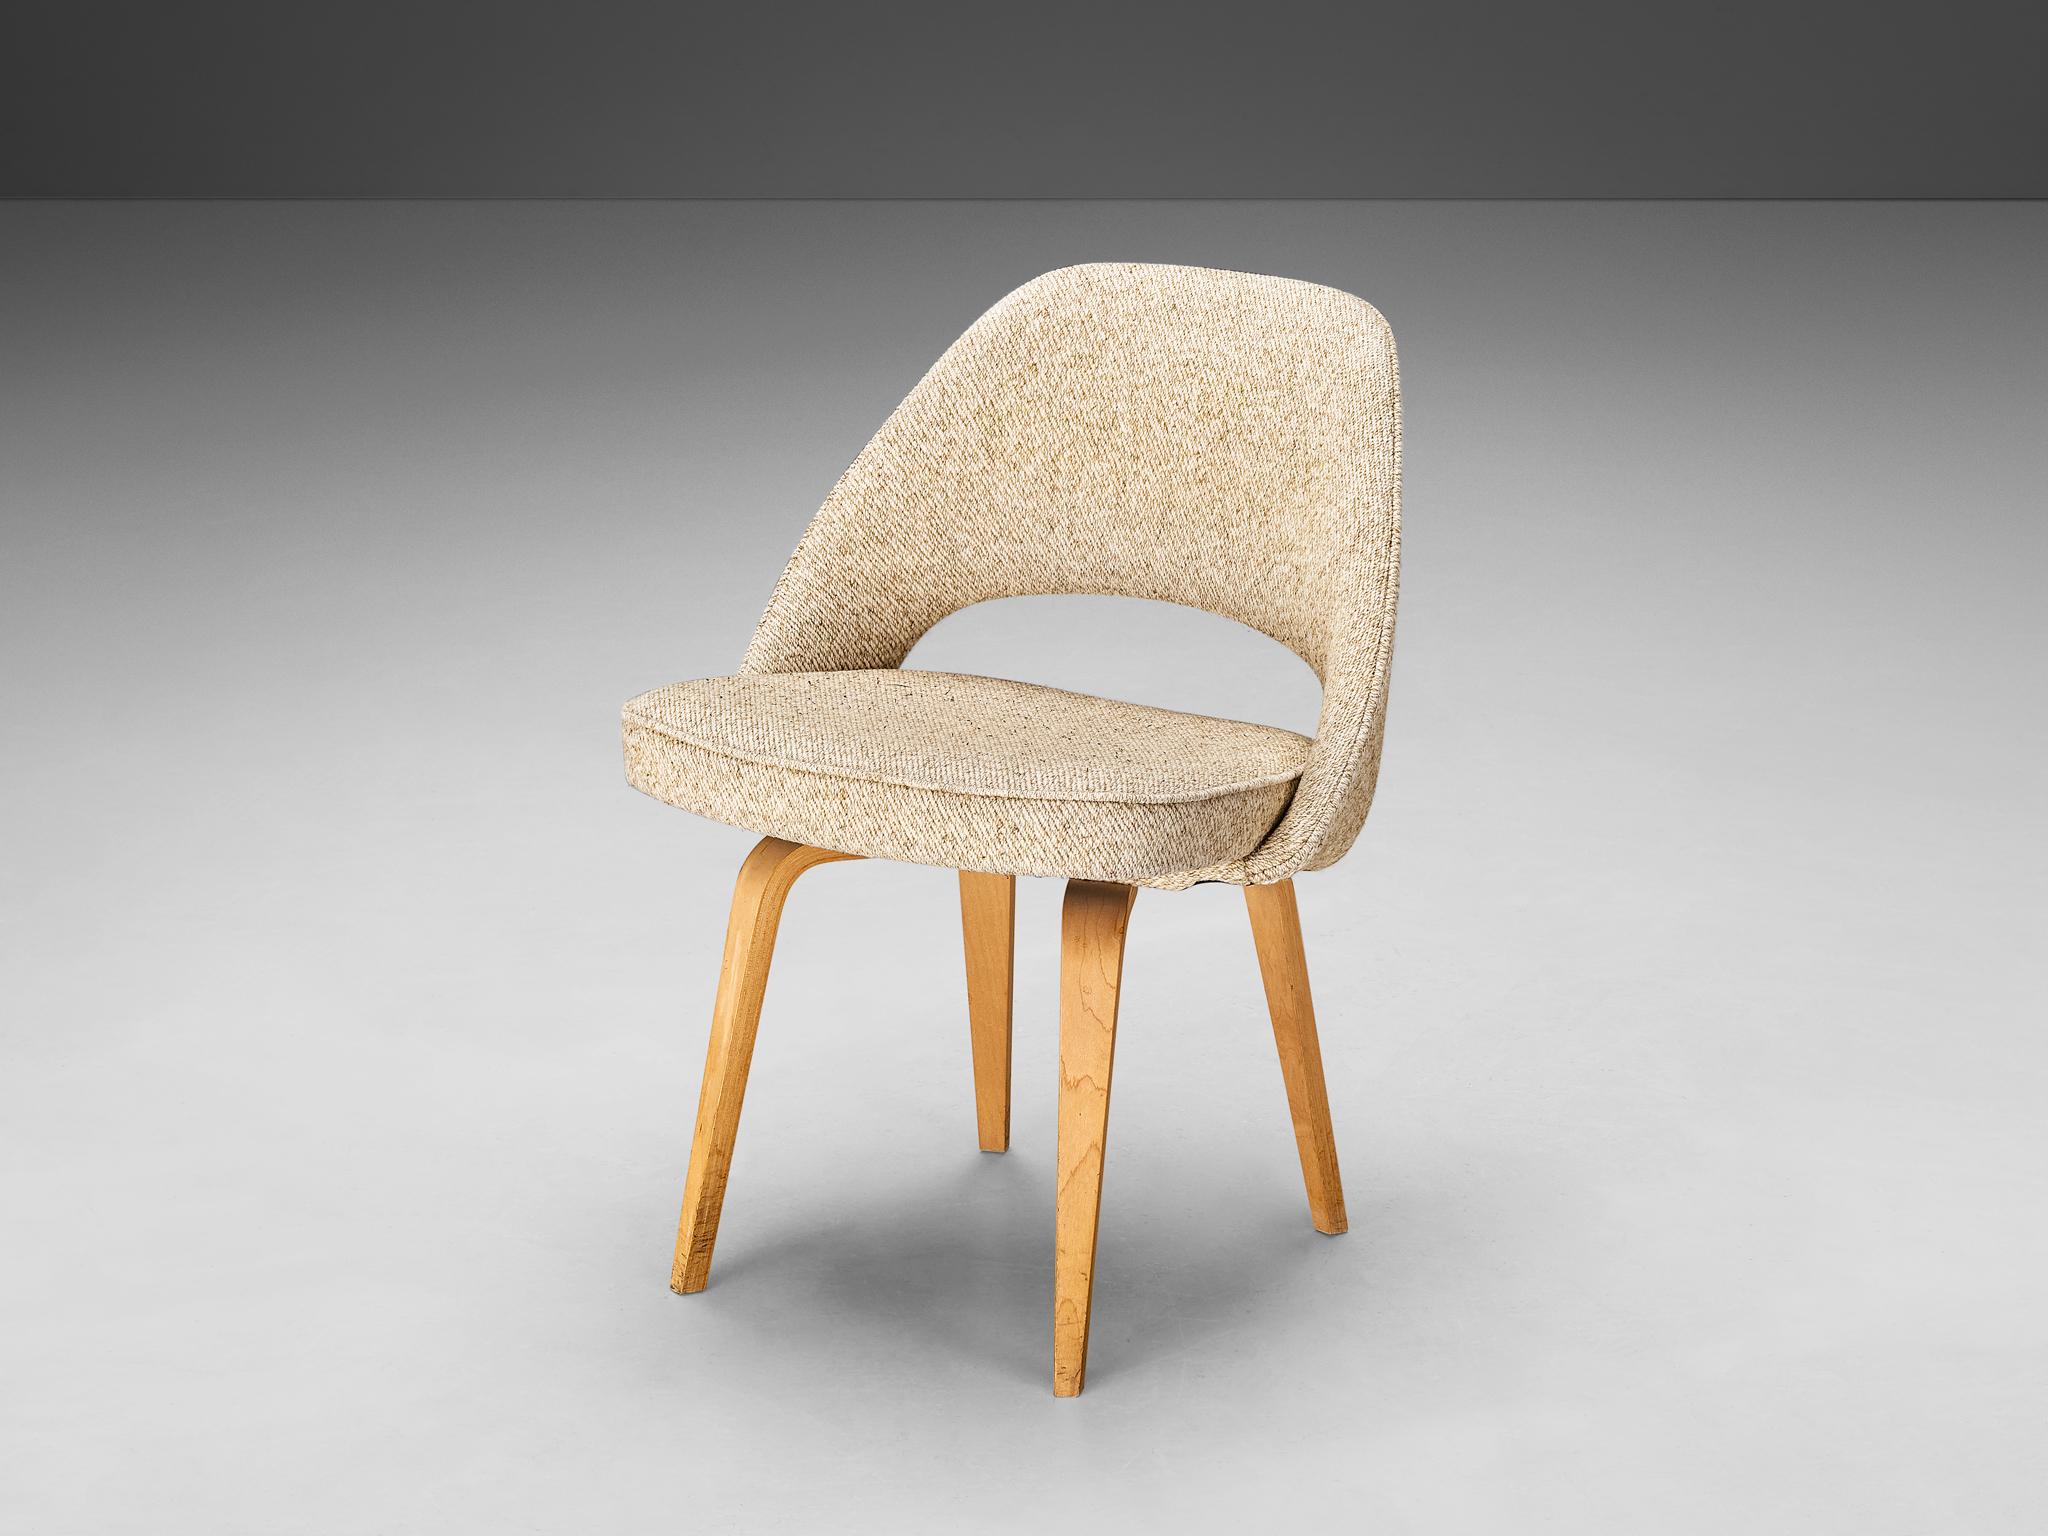 Eero Saarinen for Knoll International, dining chair, oak, fabric, United States, design 1948, later production

An organic shaped chair designed by Eero Saarinen. A fluid, sculptural form. This timeless and versatile design continues to fit